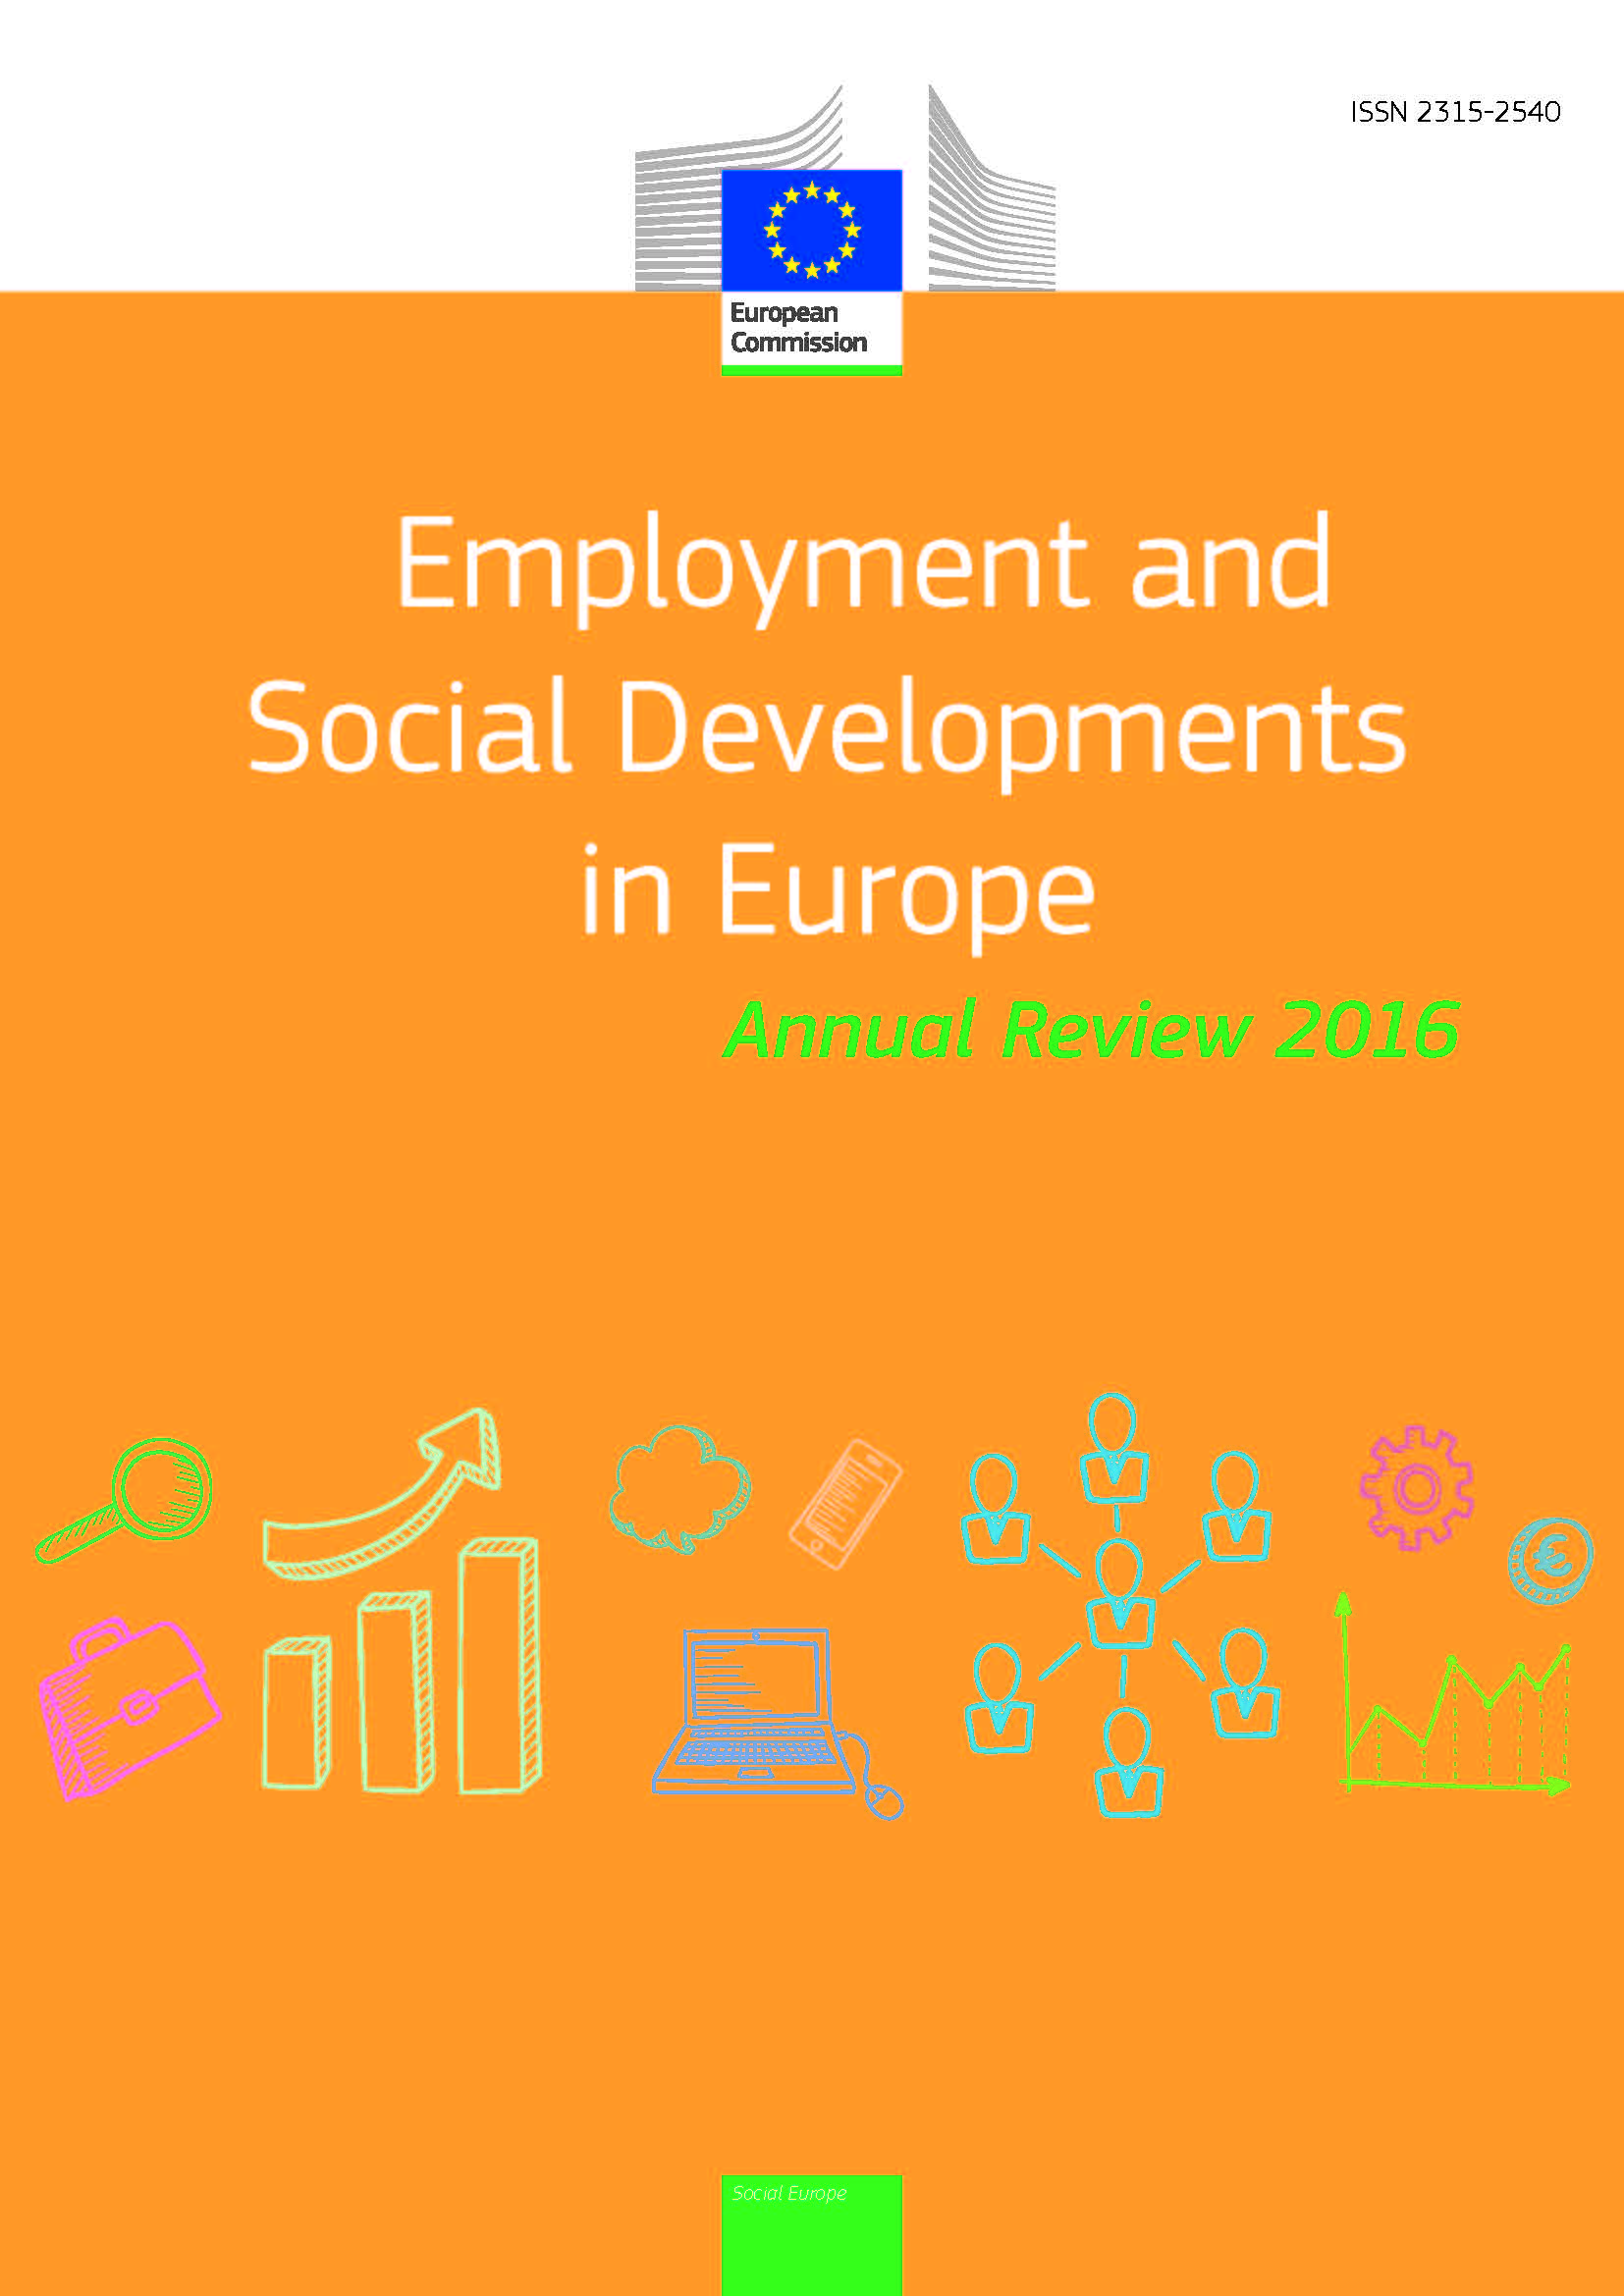 Employment and Social Developments in Europe 2016